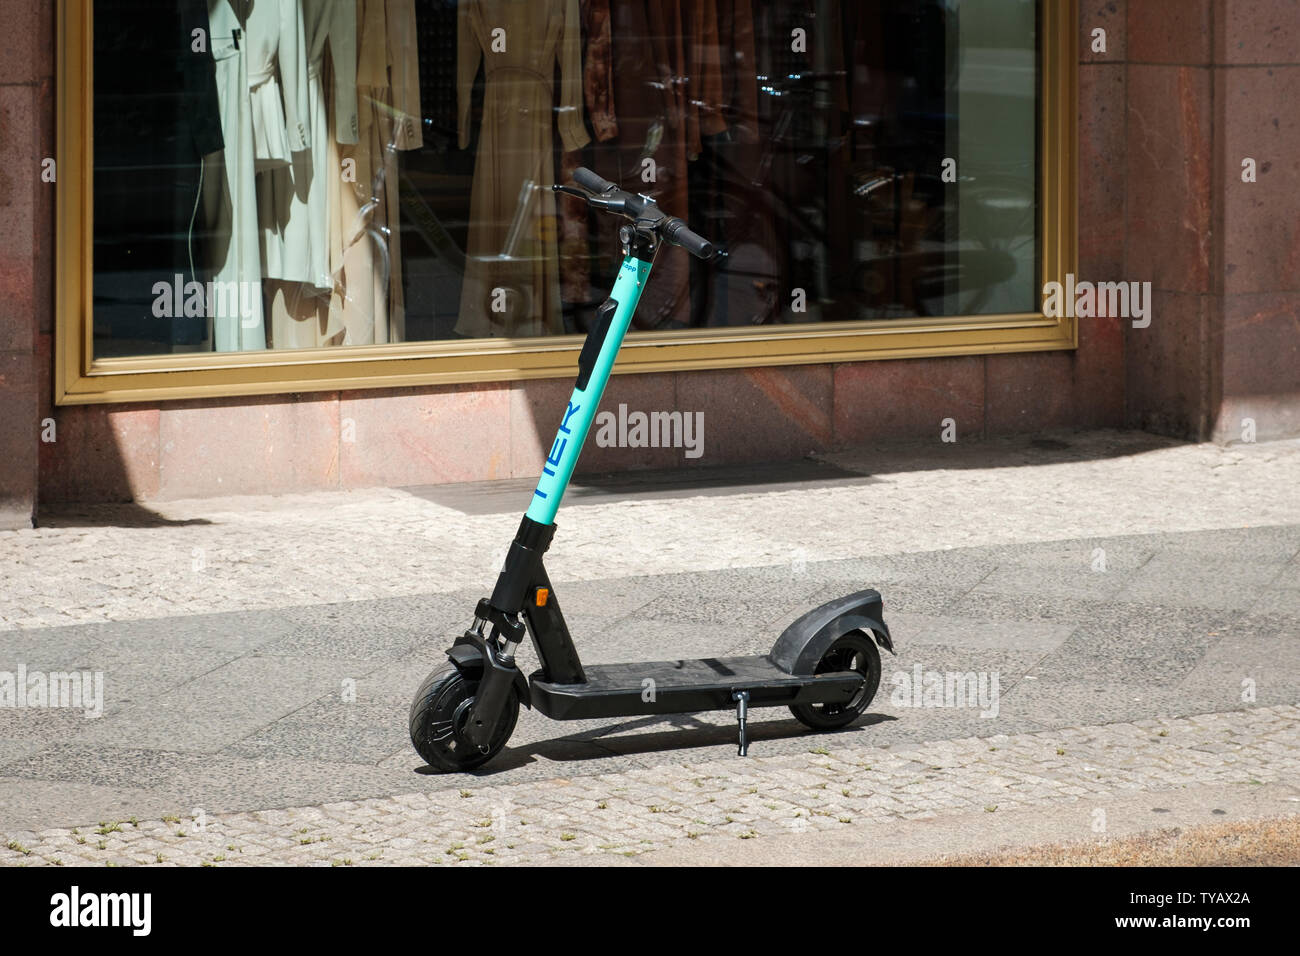 Berlin, Germany - June, 2019: Electric scooter , escooter or e-scooter of the ride sharing company TIER on sidewalk in Berlin, Germany Stock Photo